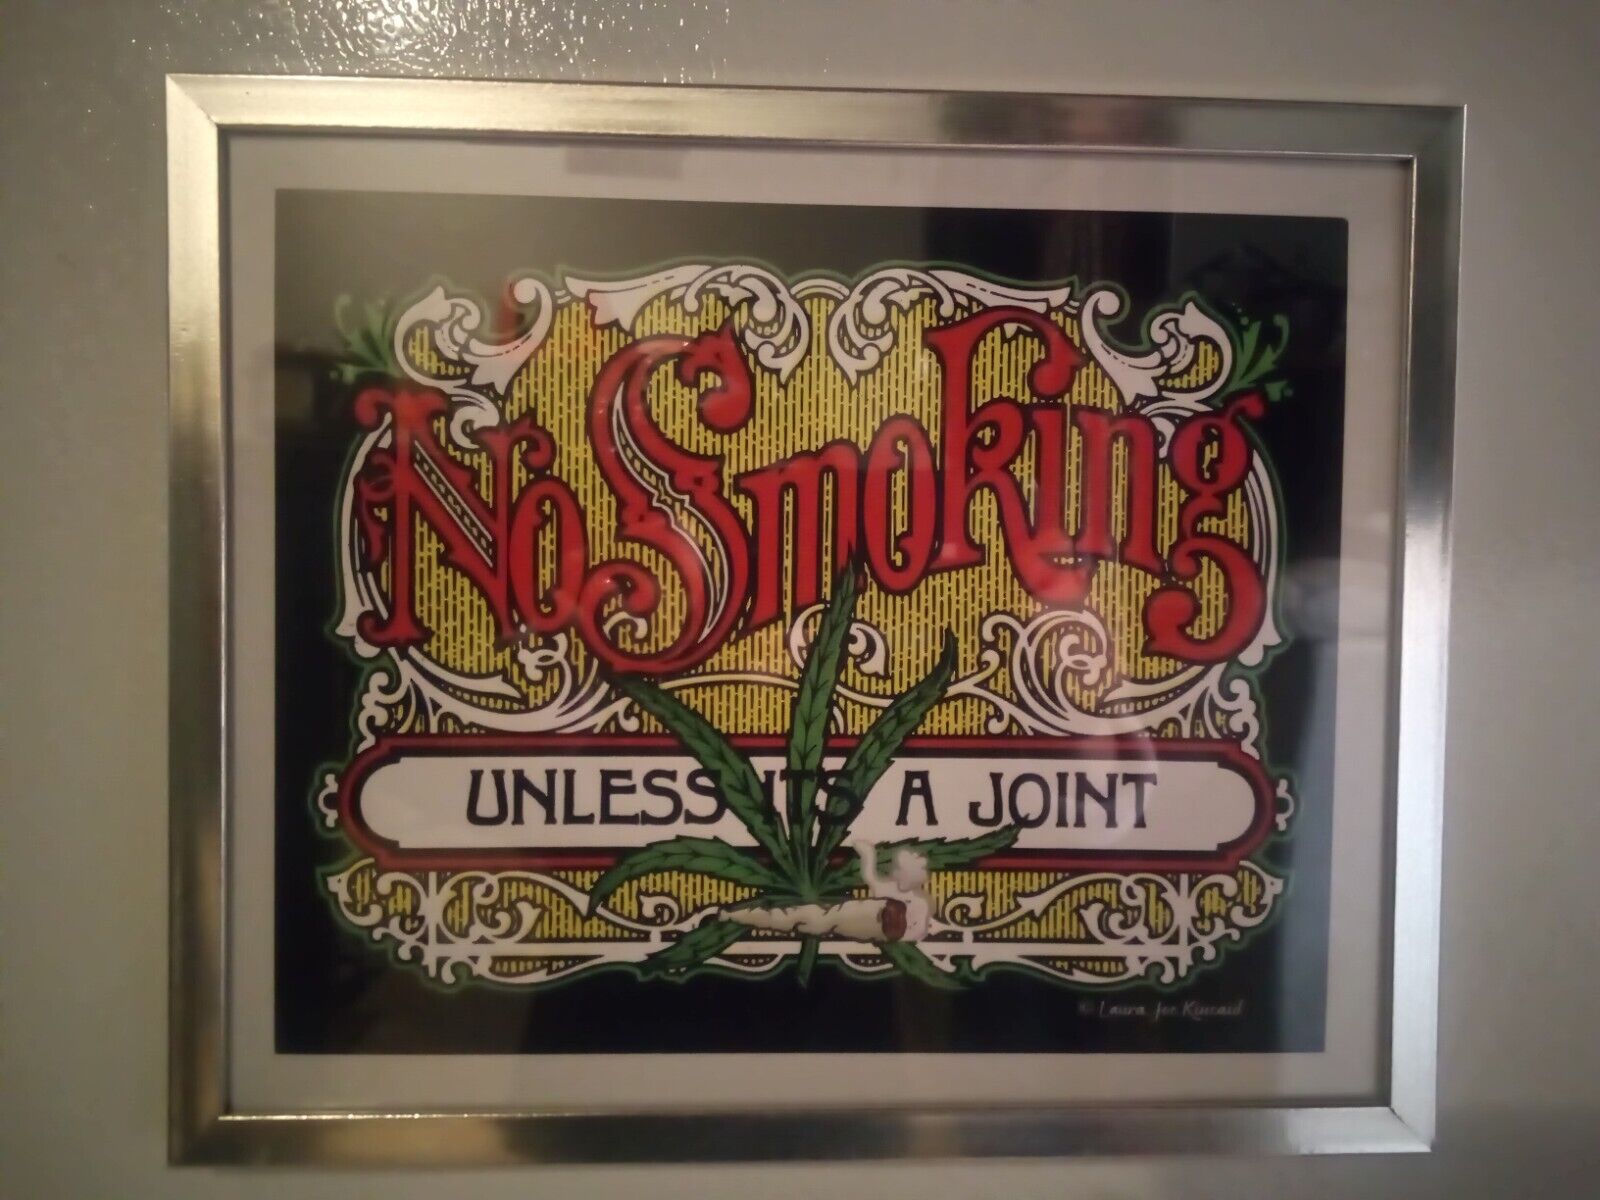 No Smoking (Unless it's a joint) framed Cannabis wall art, collectible.